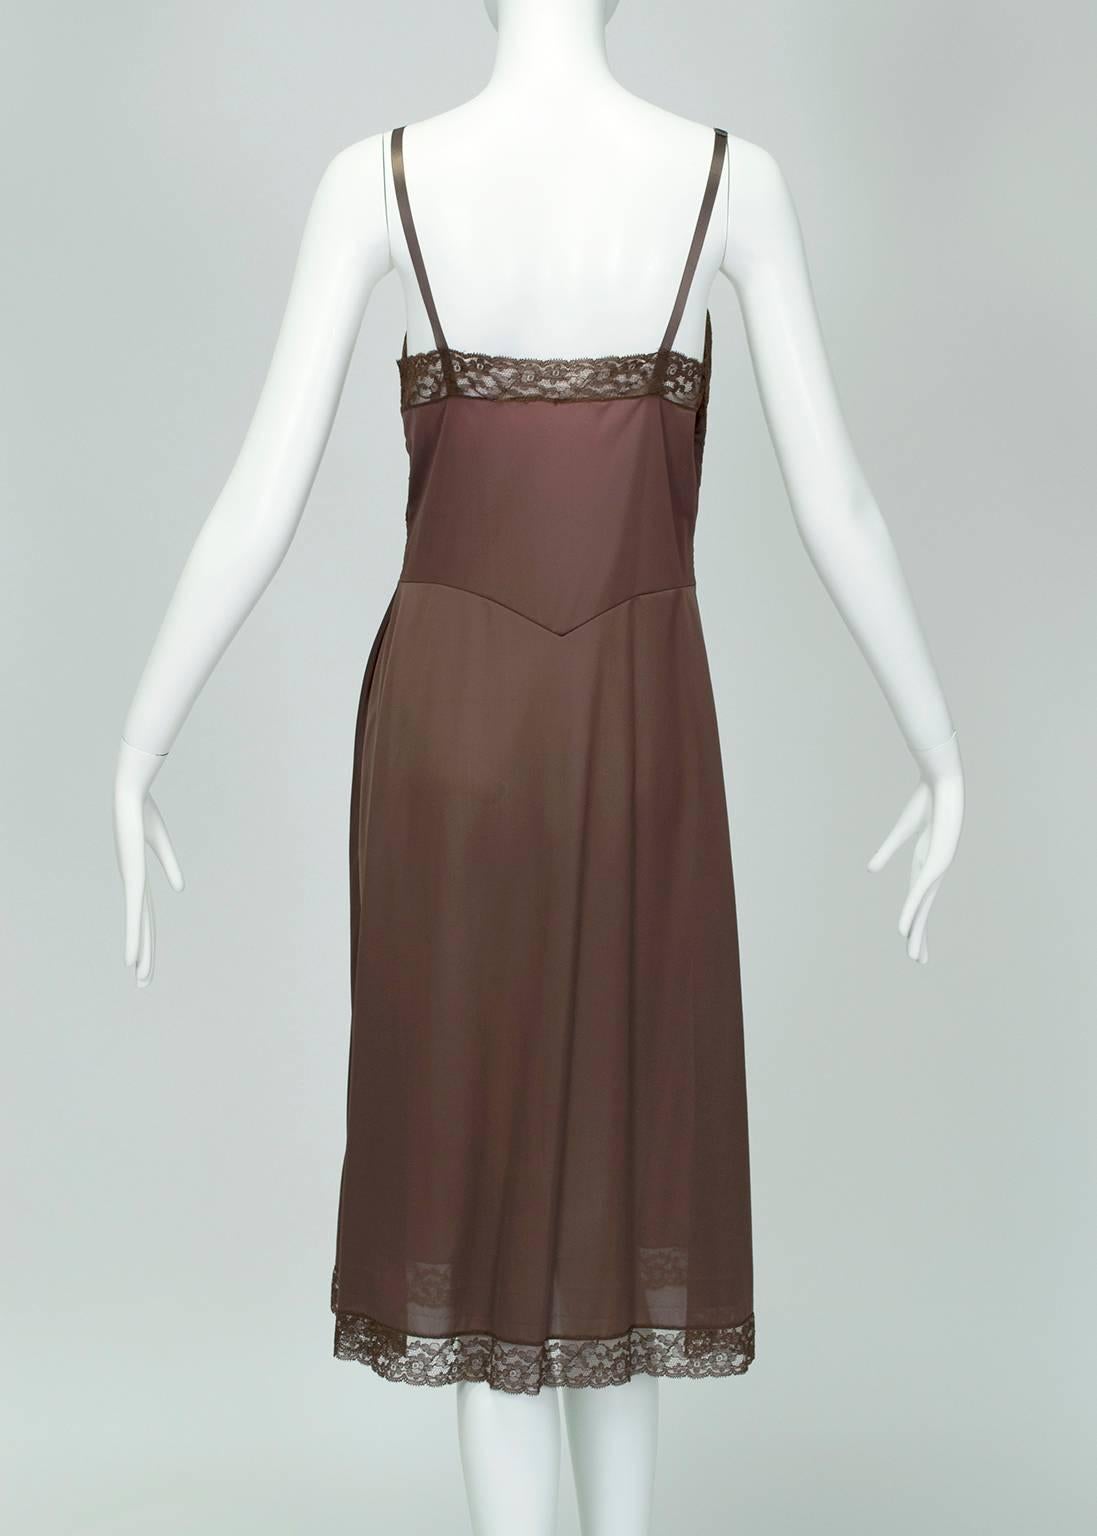 Hollywood Regency Sheer Brown Lace Ankle-Length Capelet Gown and Slip - M, 1930s For Sale 1